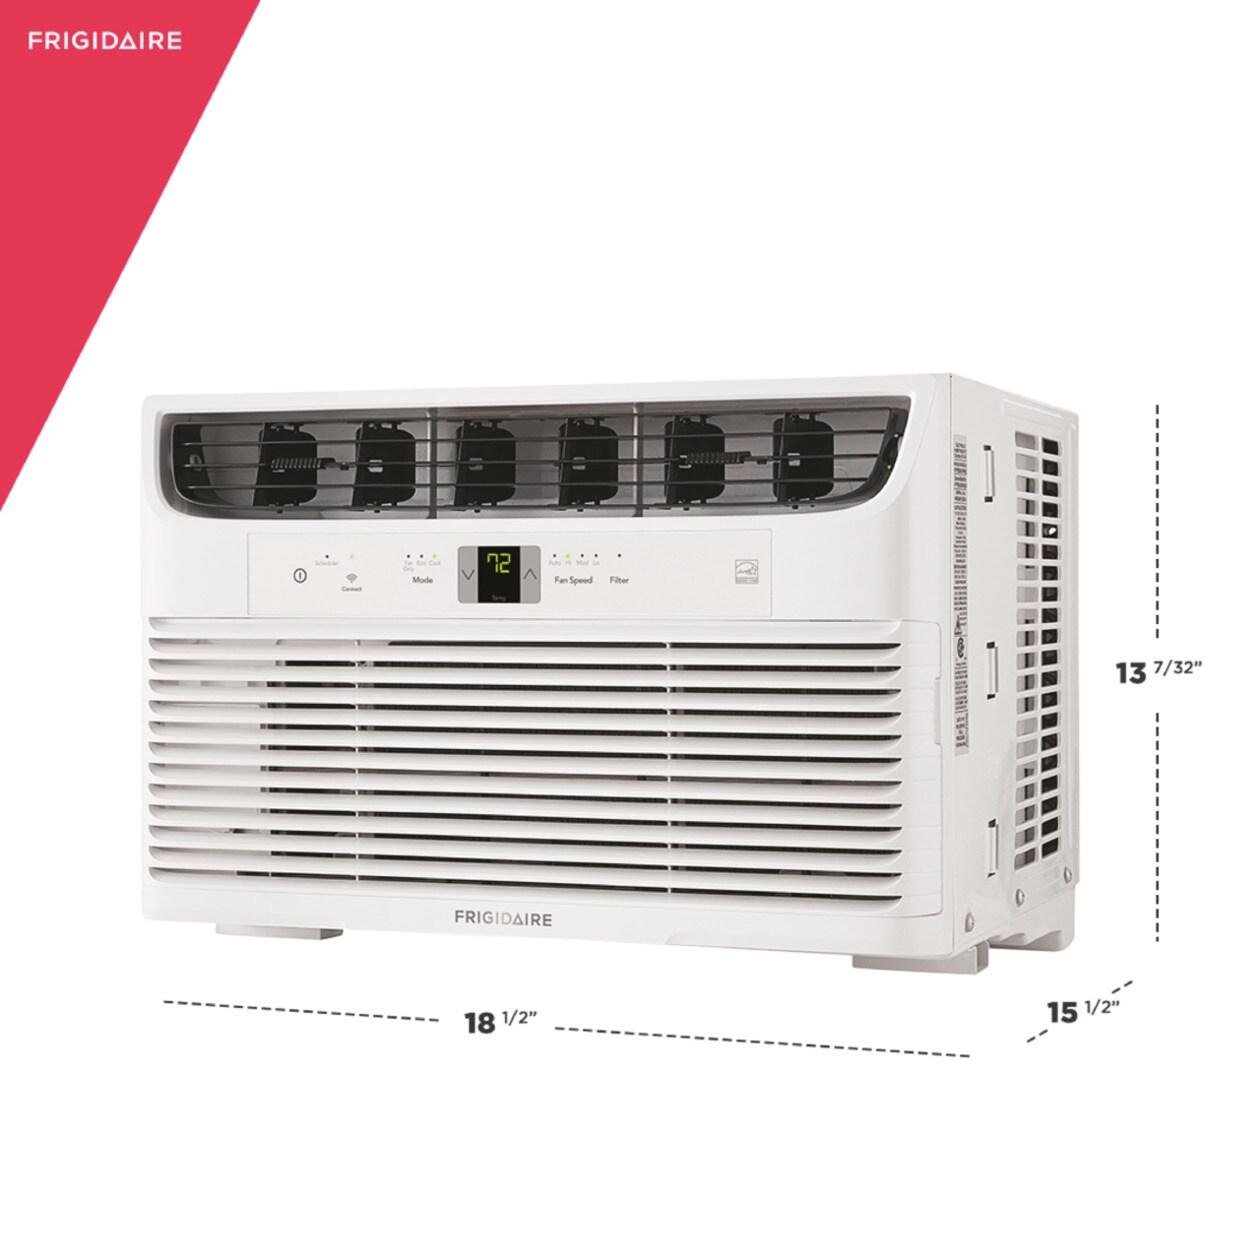 Frigidaire&nbsp;8,000 BTU Connected Window-Mounted Room Air Conditioner - image 5 of 6